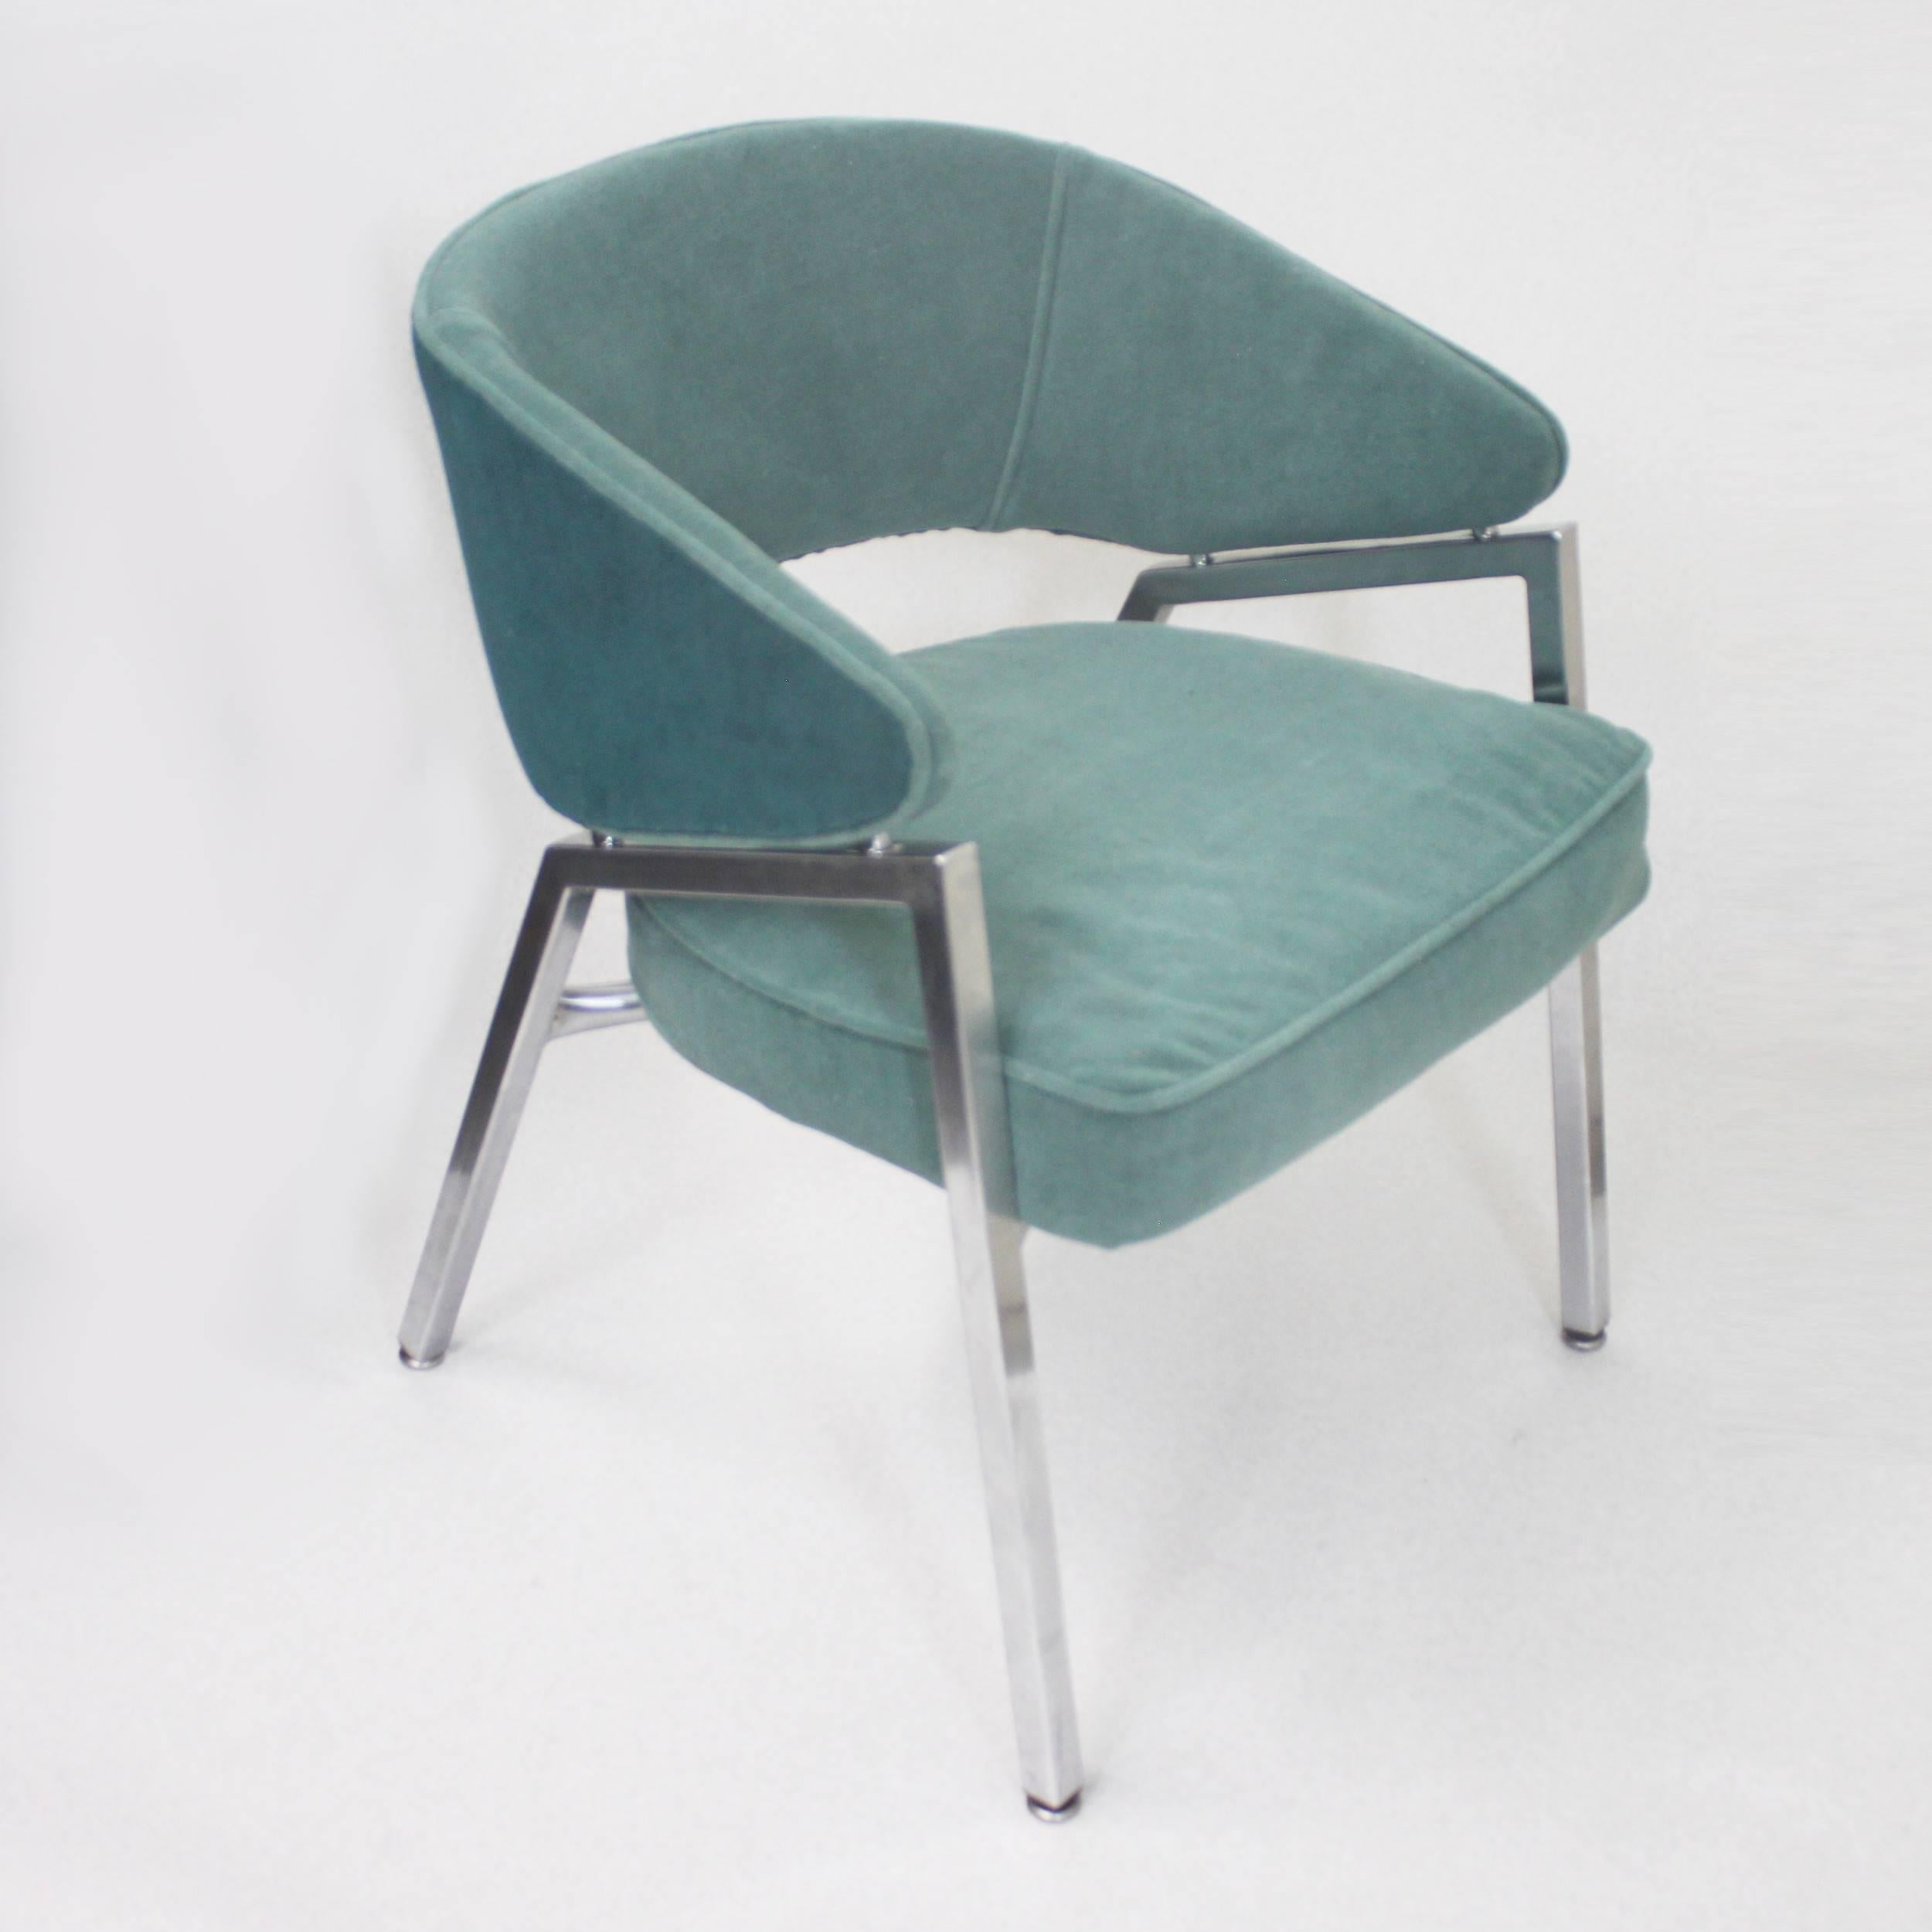 Late 20th Century Rare Pair of 1970s Mid-Century Modern Teal Green and Chrome Side Arm Chairs